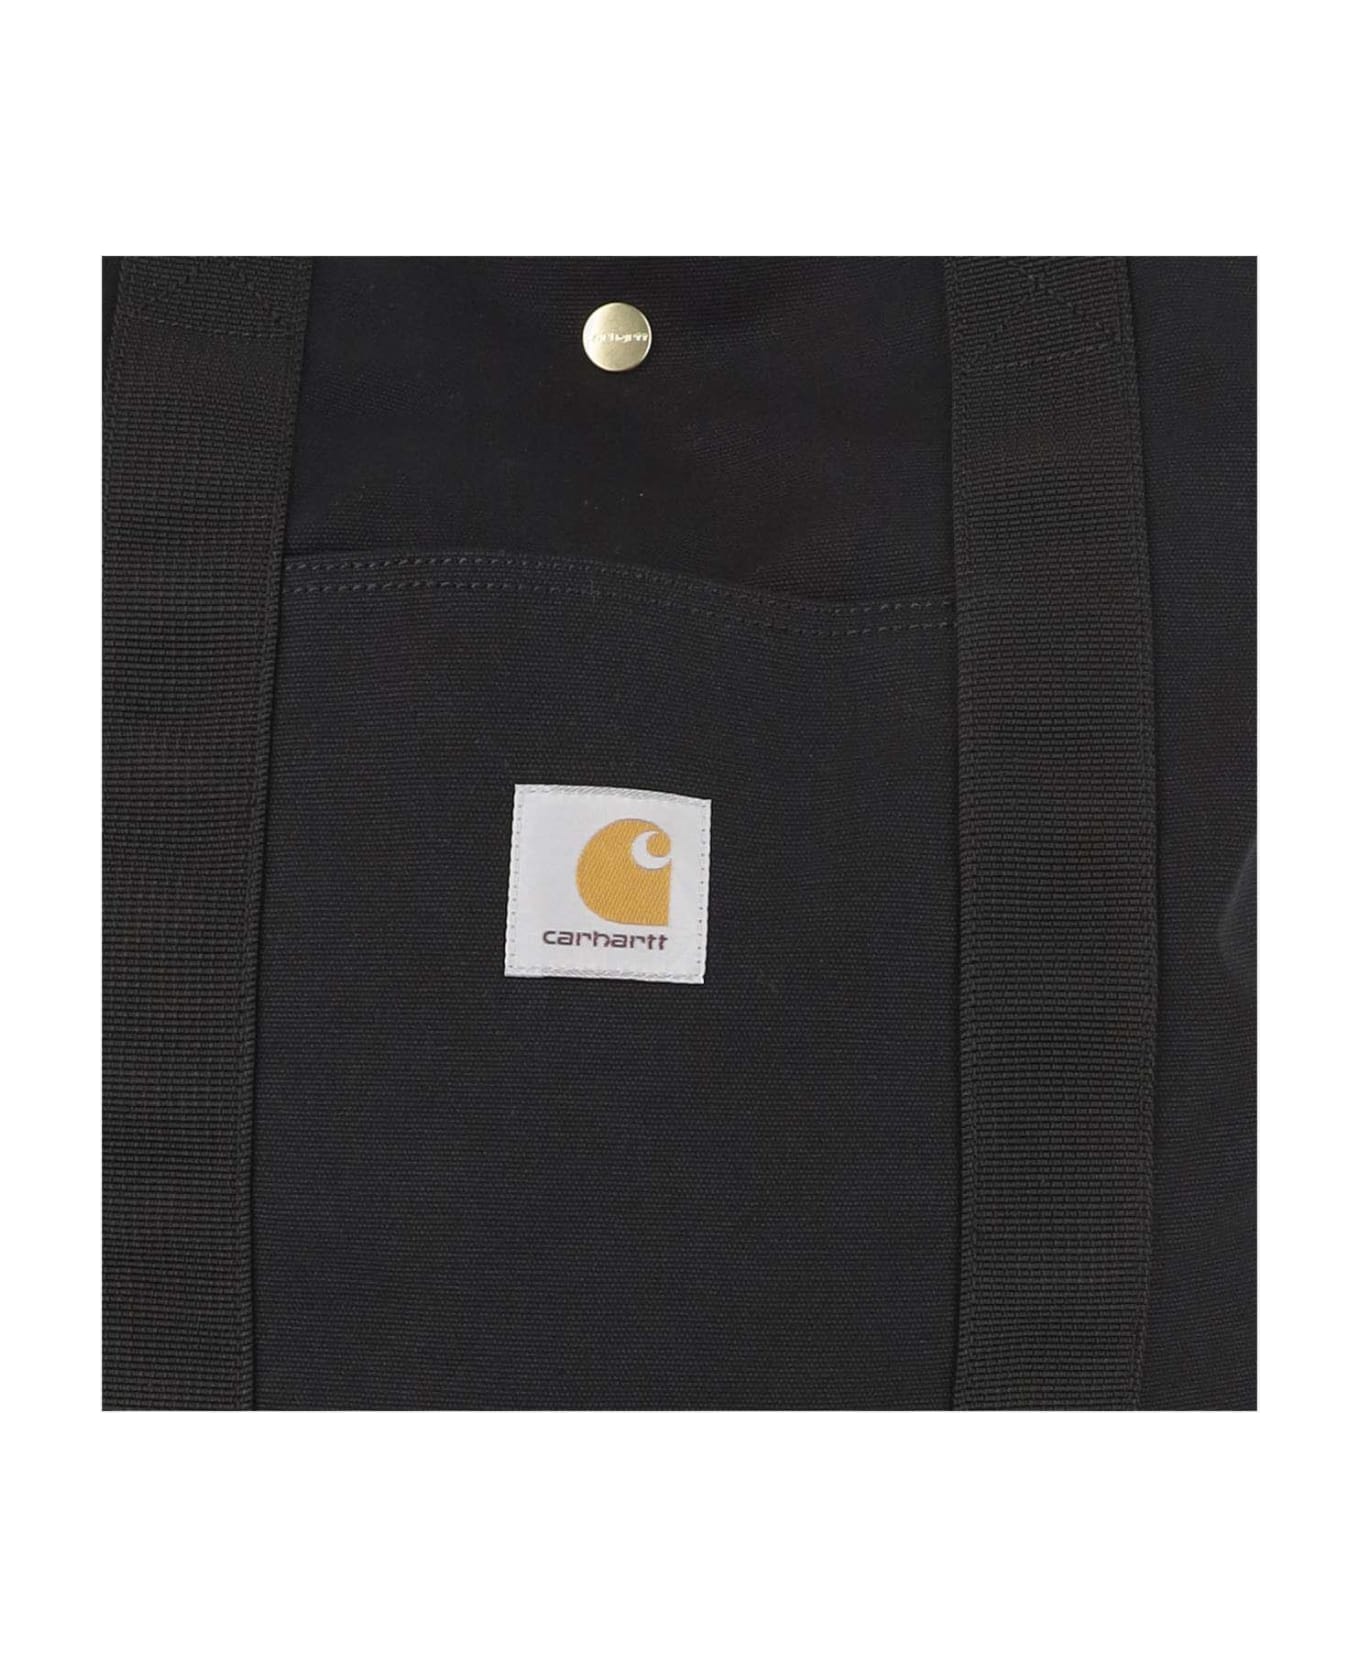 Carhartt Canvas Tote Bag With Logo - Black